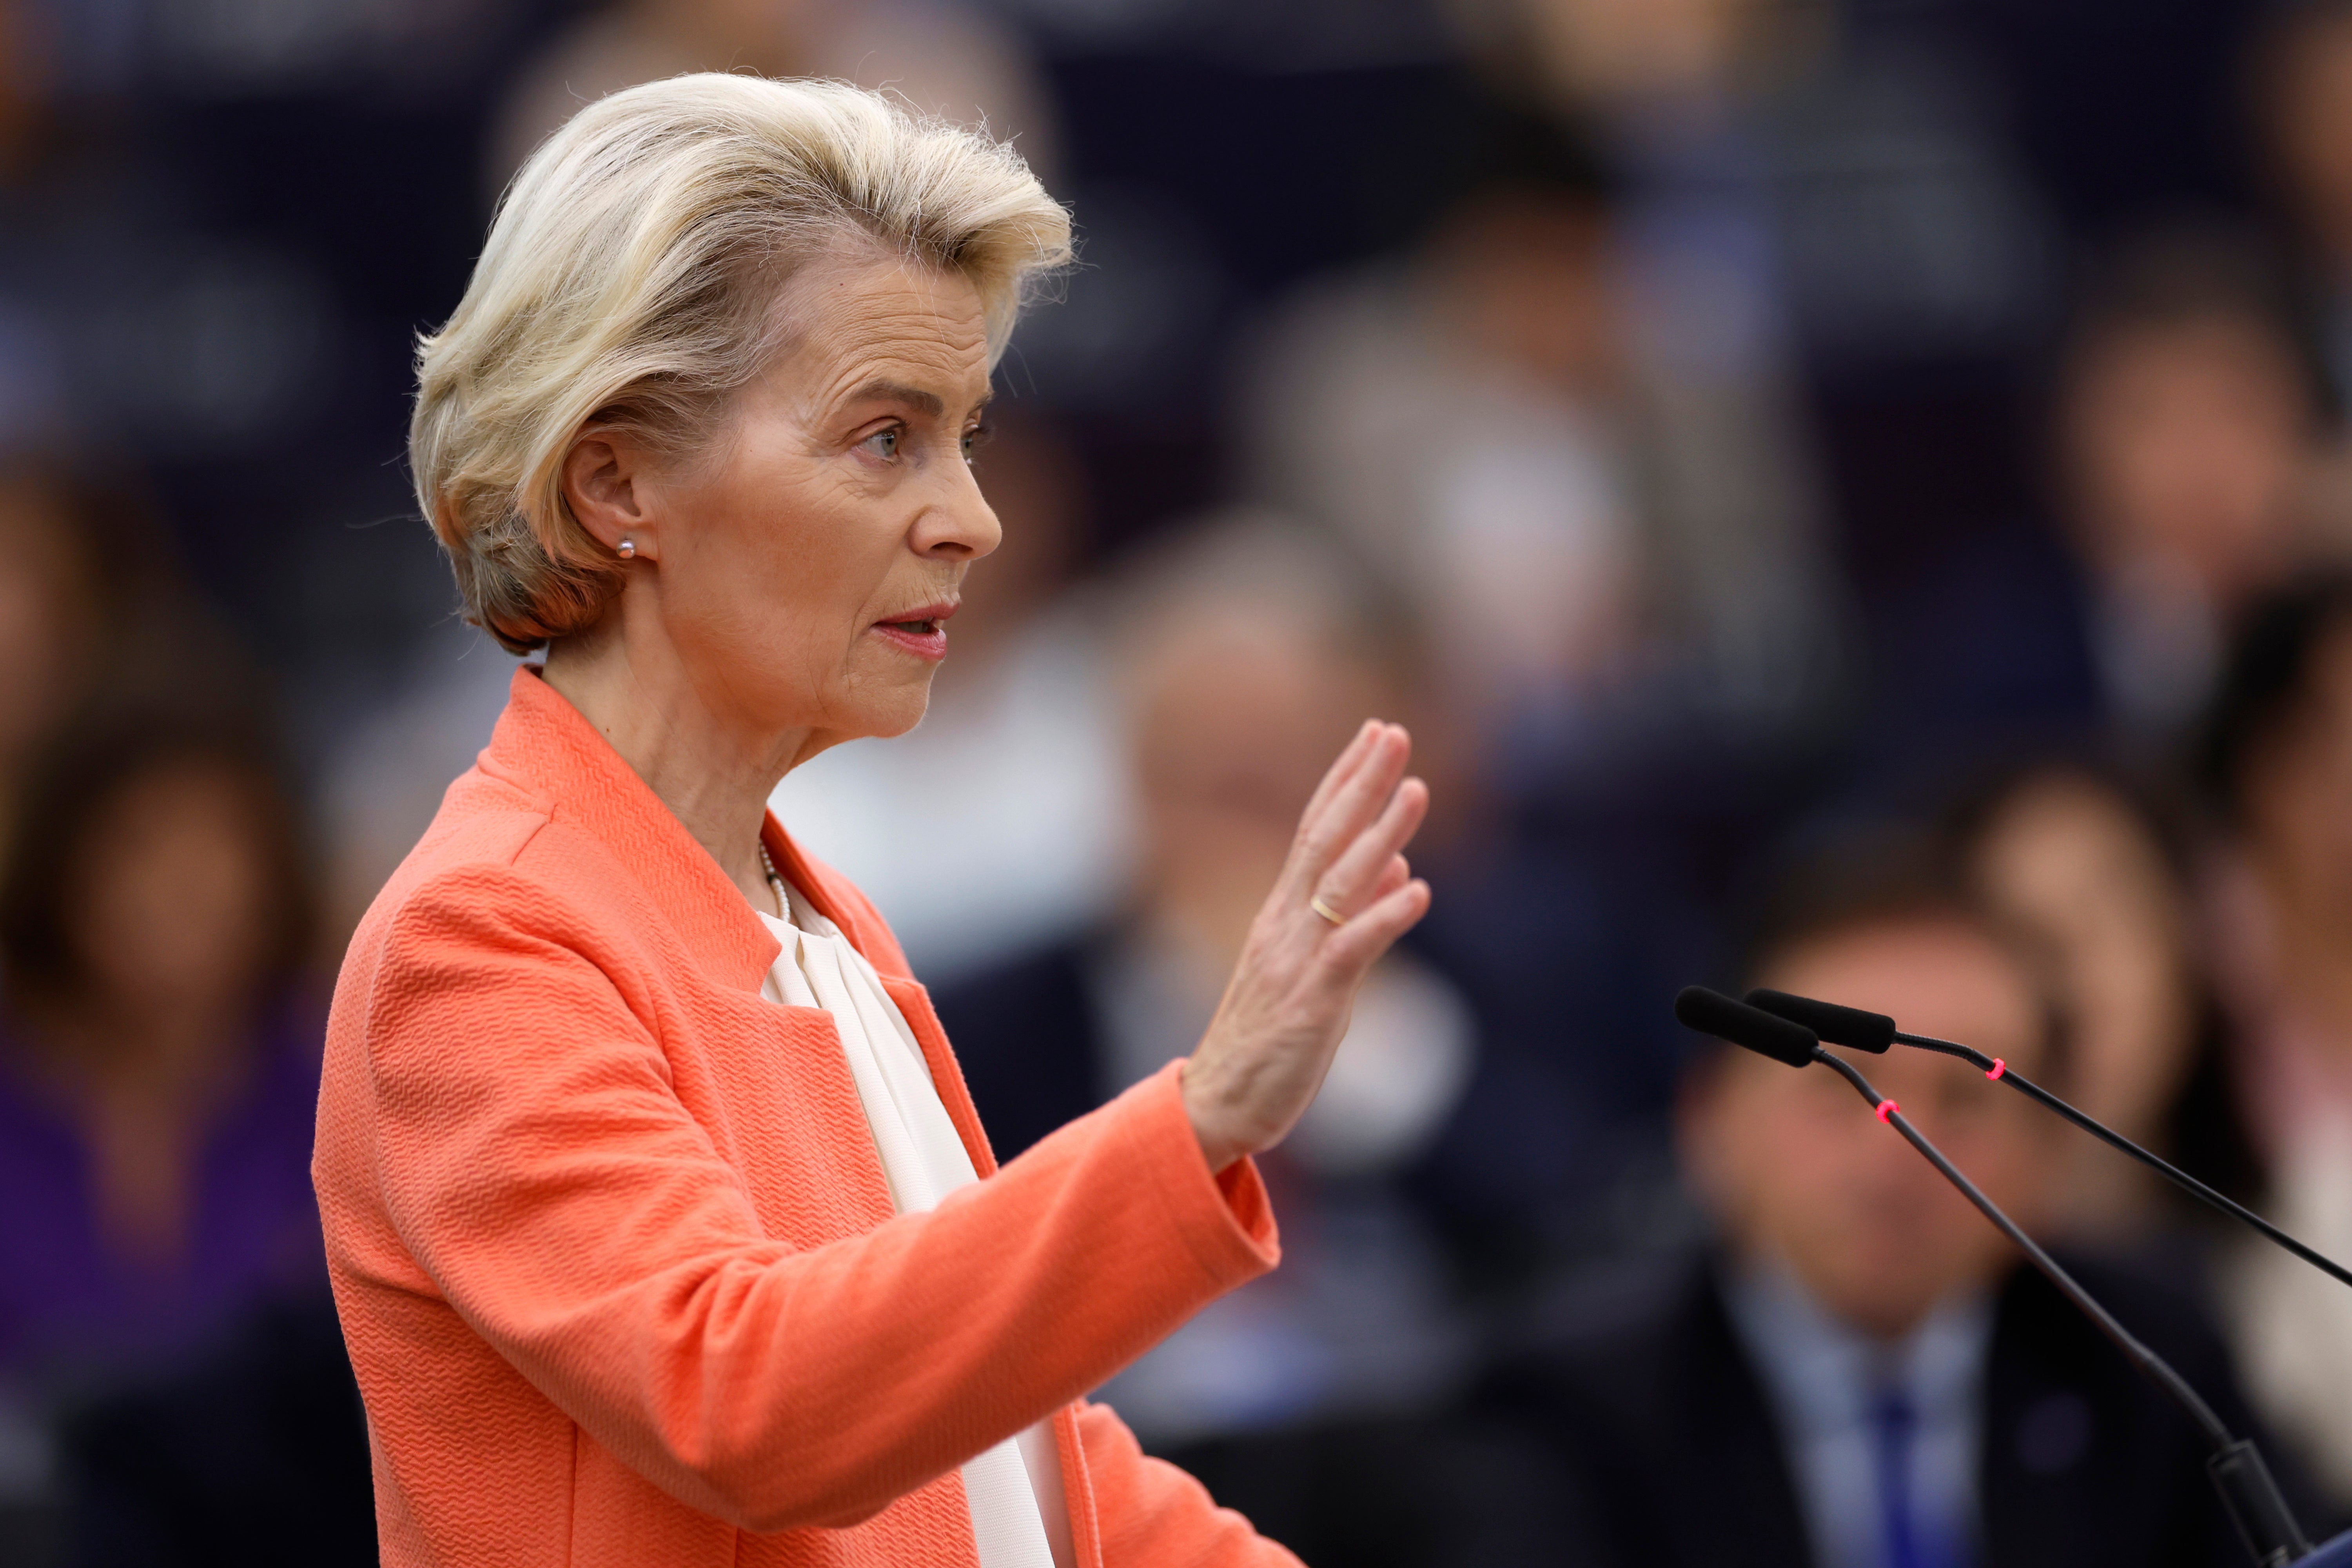 This week, Ursula von der Leyen delivered her fifth and possibly last State of the (European) Union address in untypically high-flown and futuristic terms